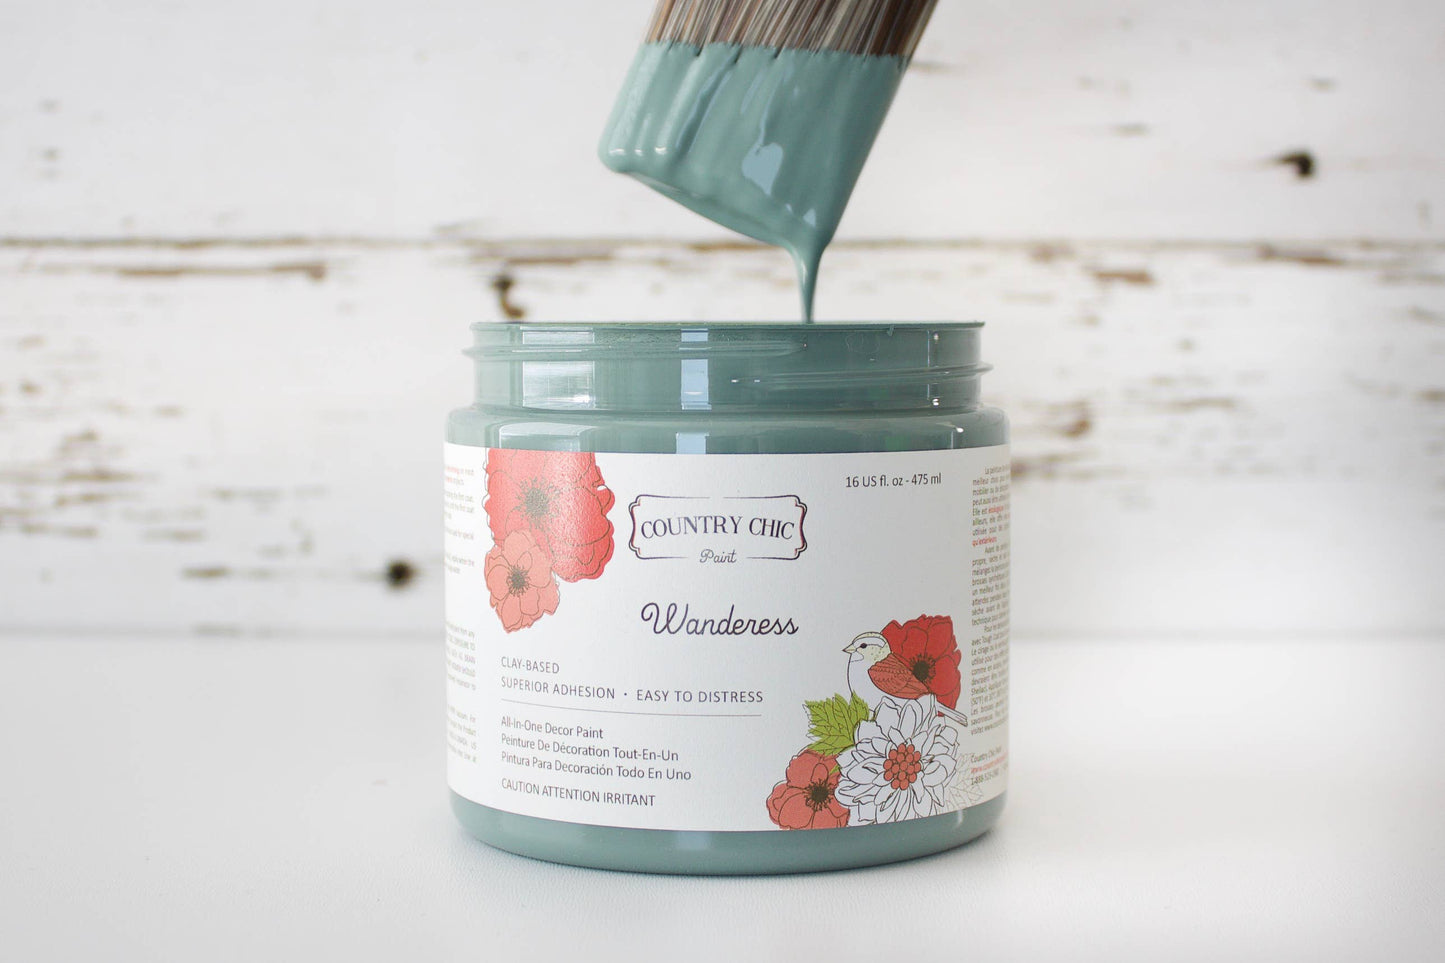 All-in-One Decor Paint - Wanderess